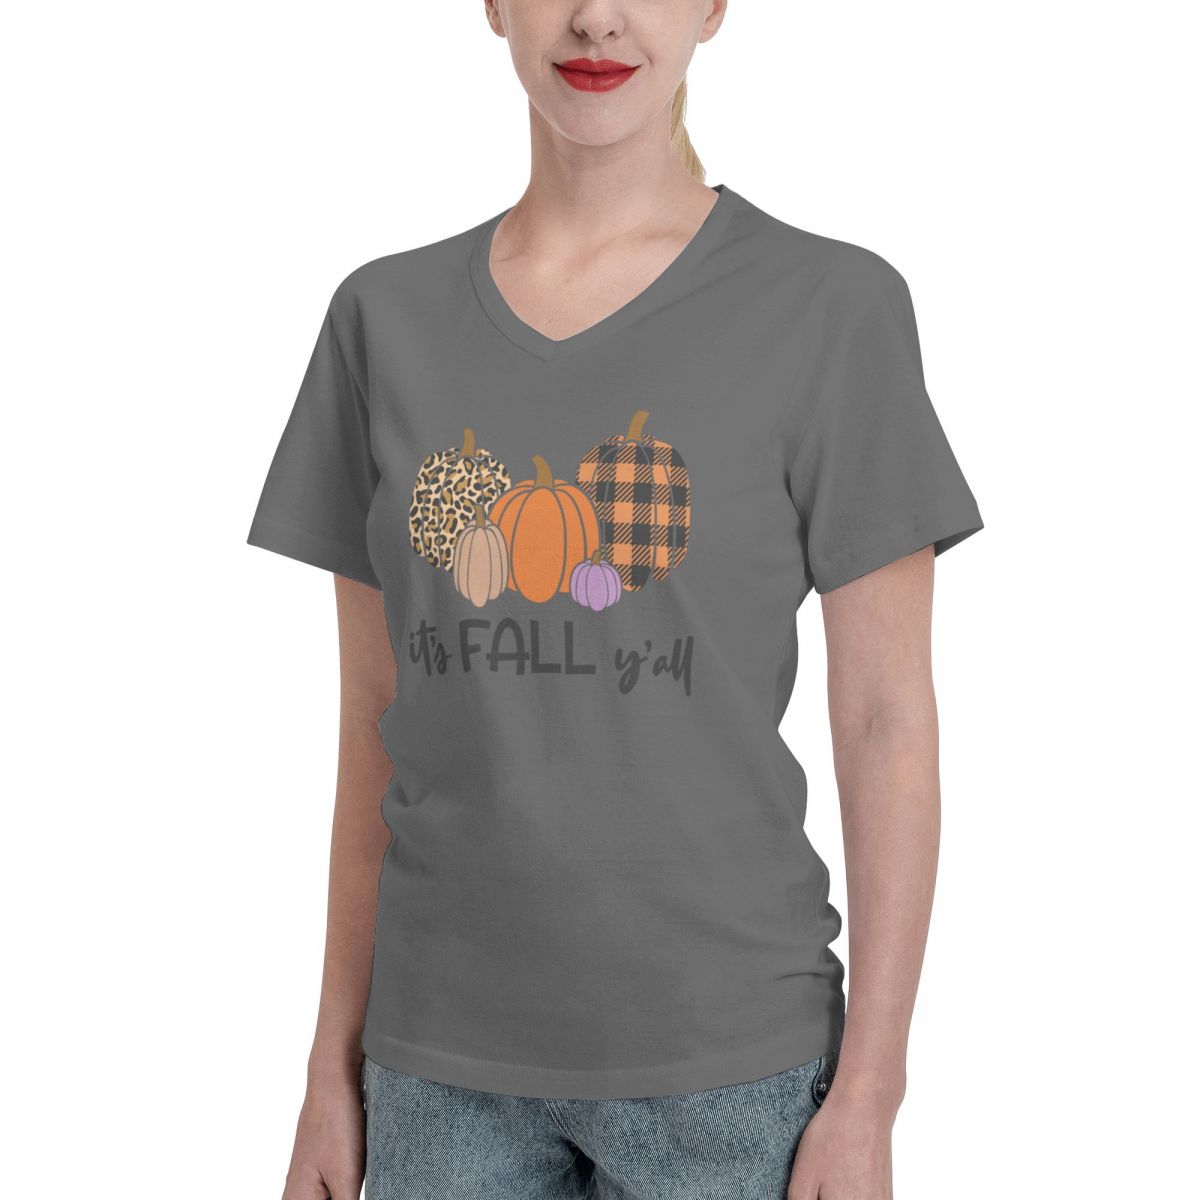 It's Fall Y'all Women's V-Neck T-Shirt